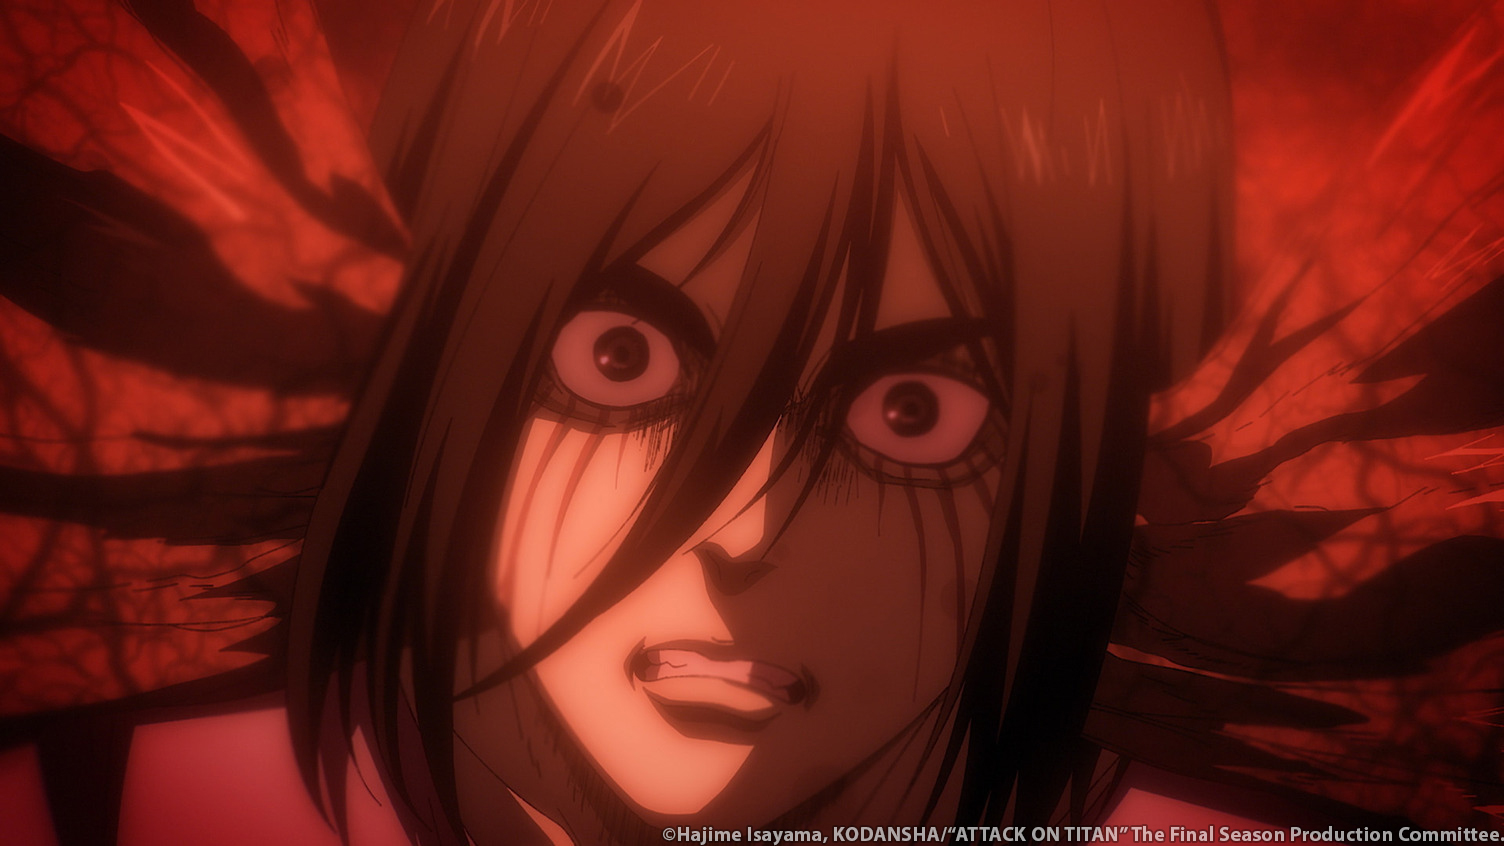 Attack on Titan Finale Trailer Sets Up the Anime's Final Battle